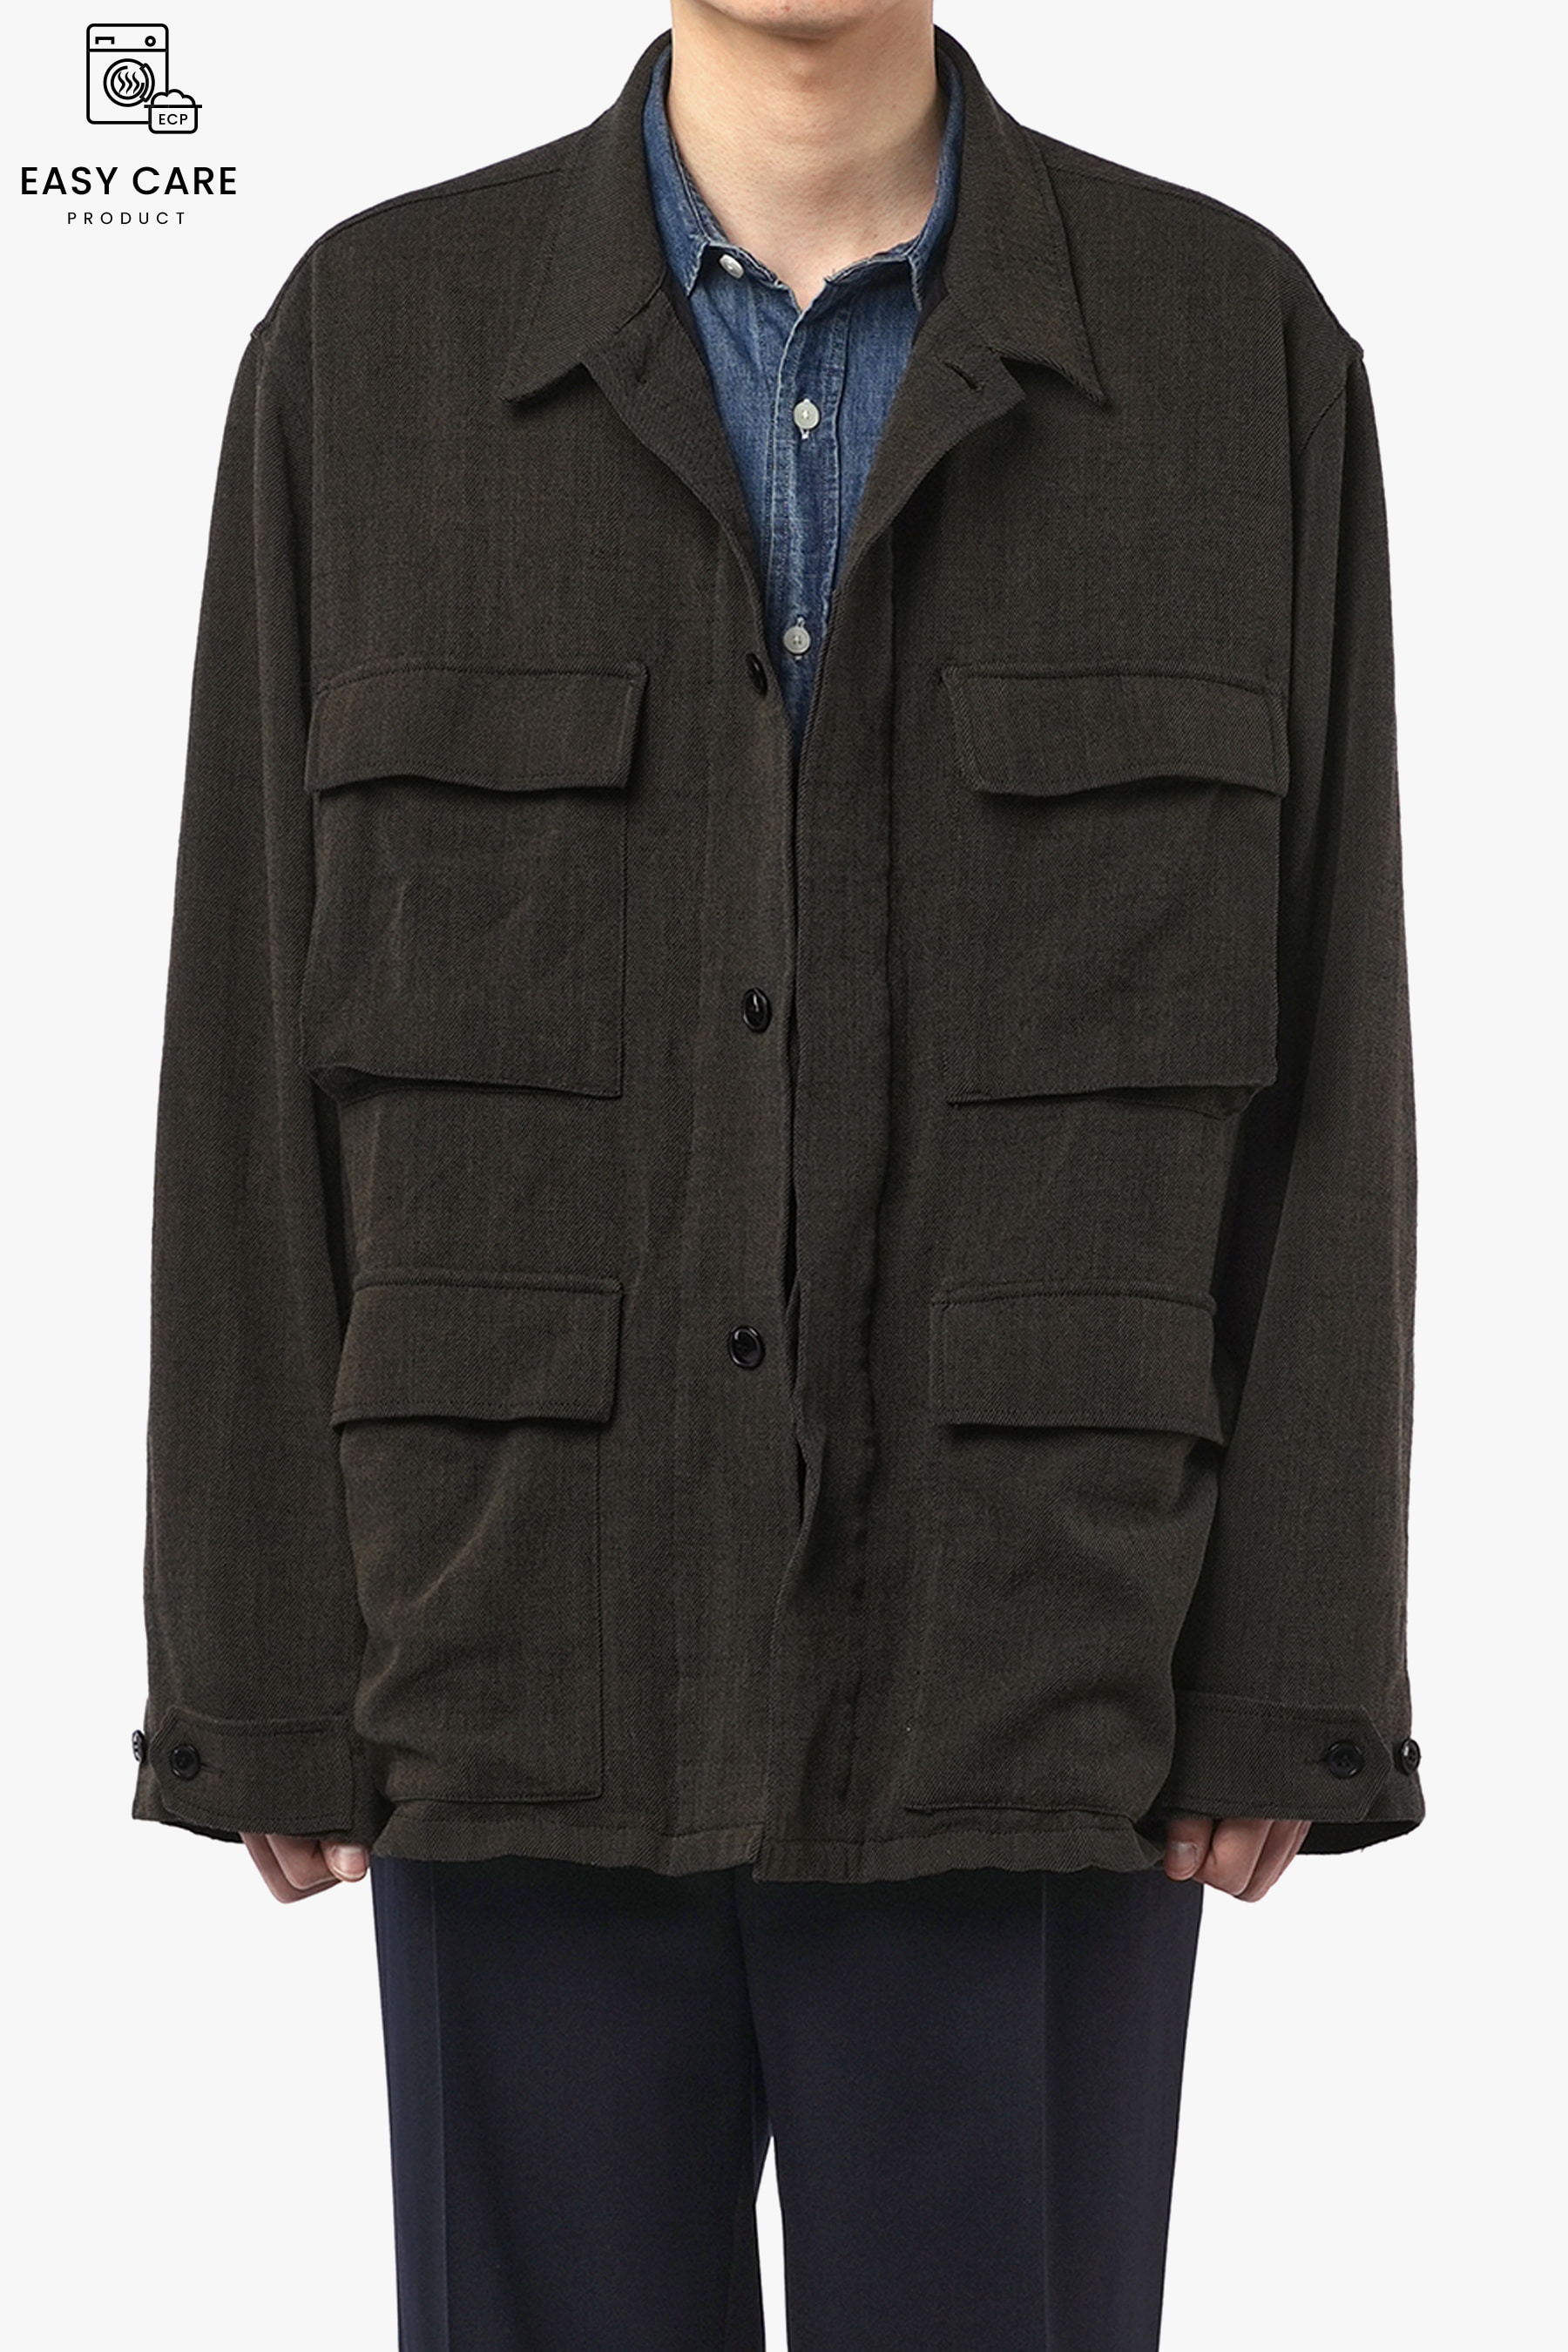 OLIVE BROWN WASHED DRILL WOOL BDU JACKET (ECP GARMENT PROCESS)